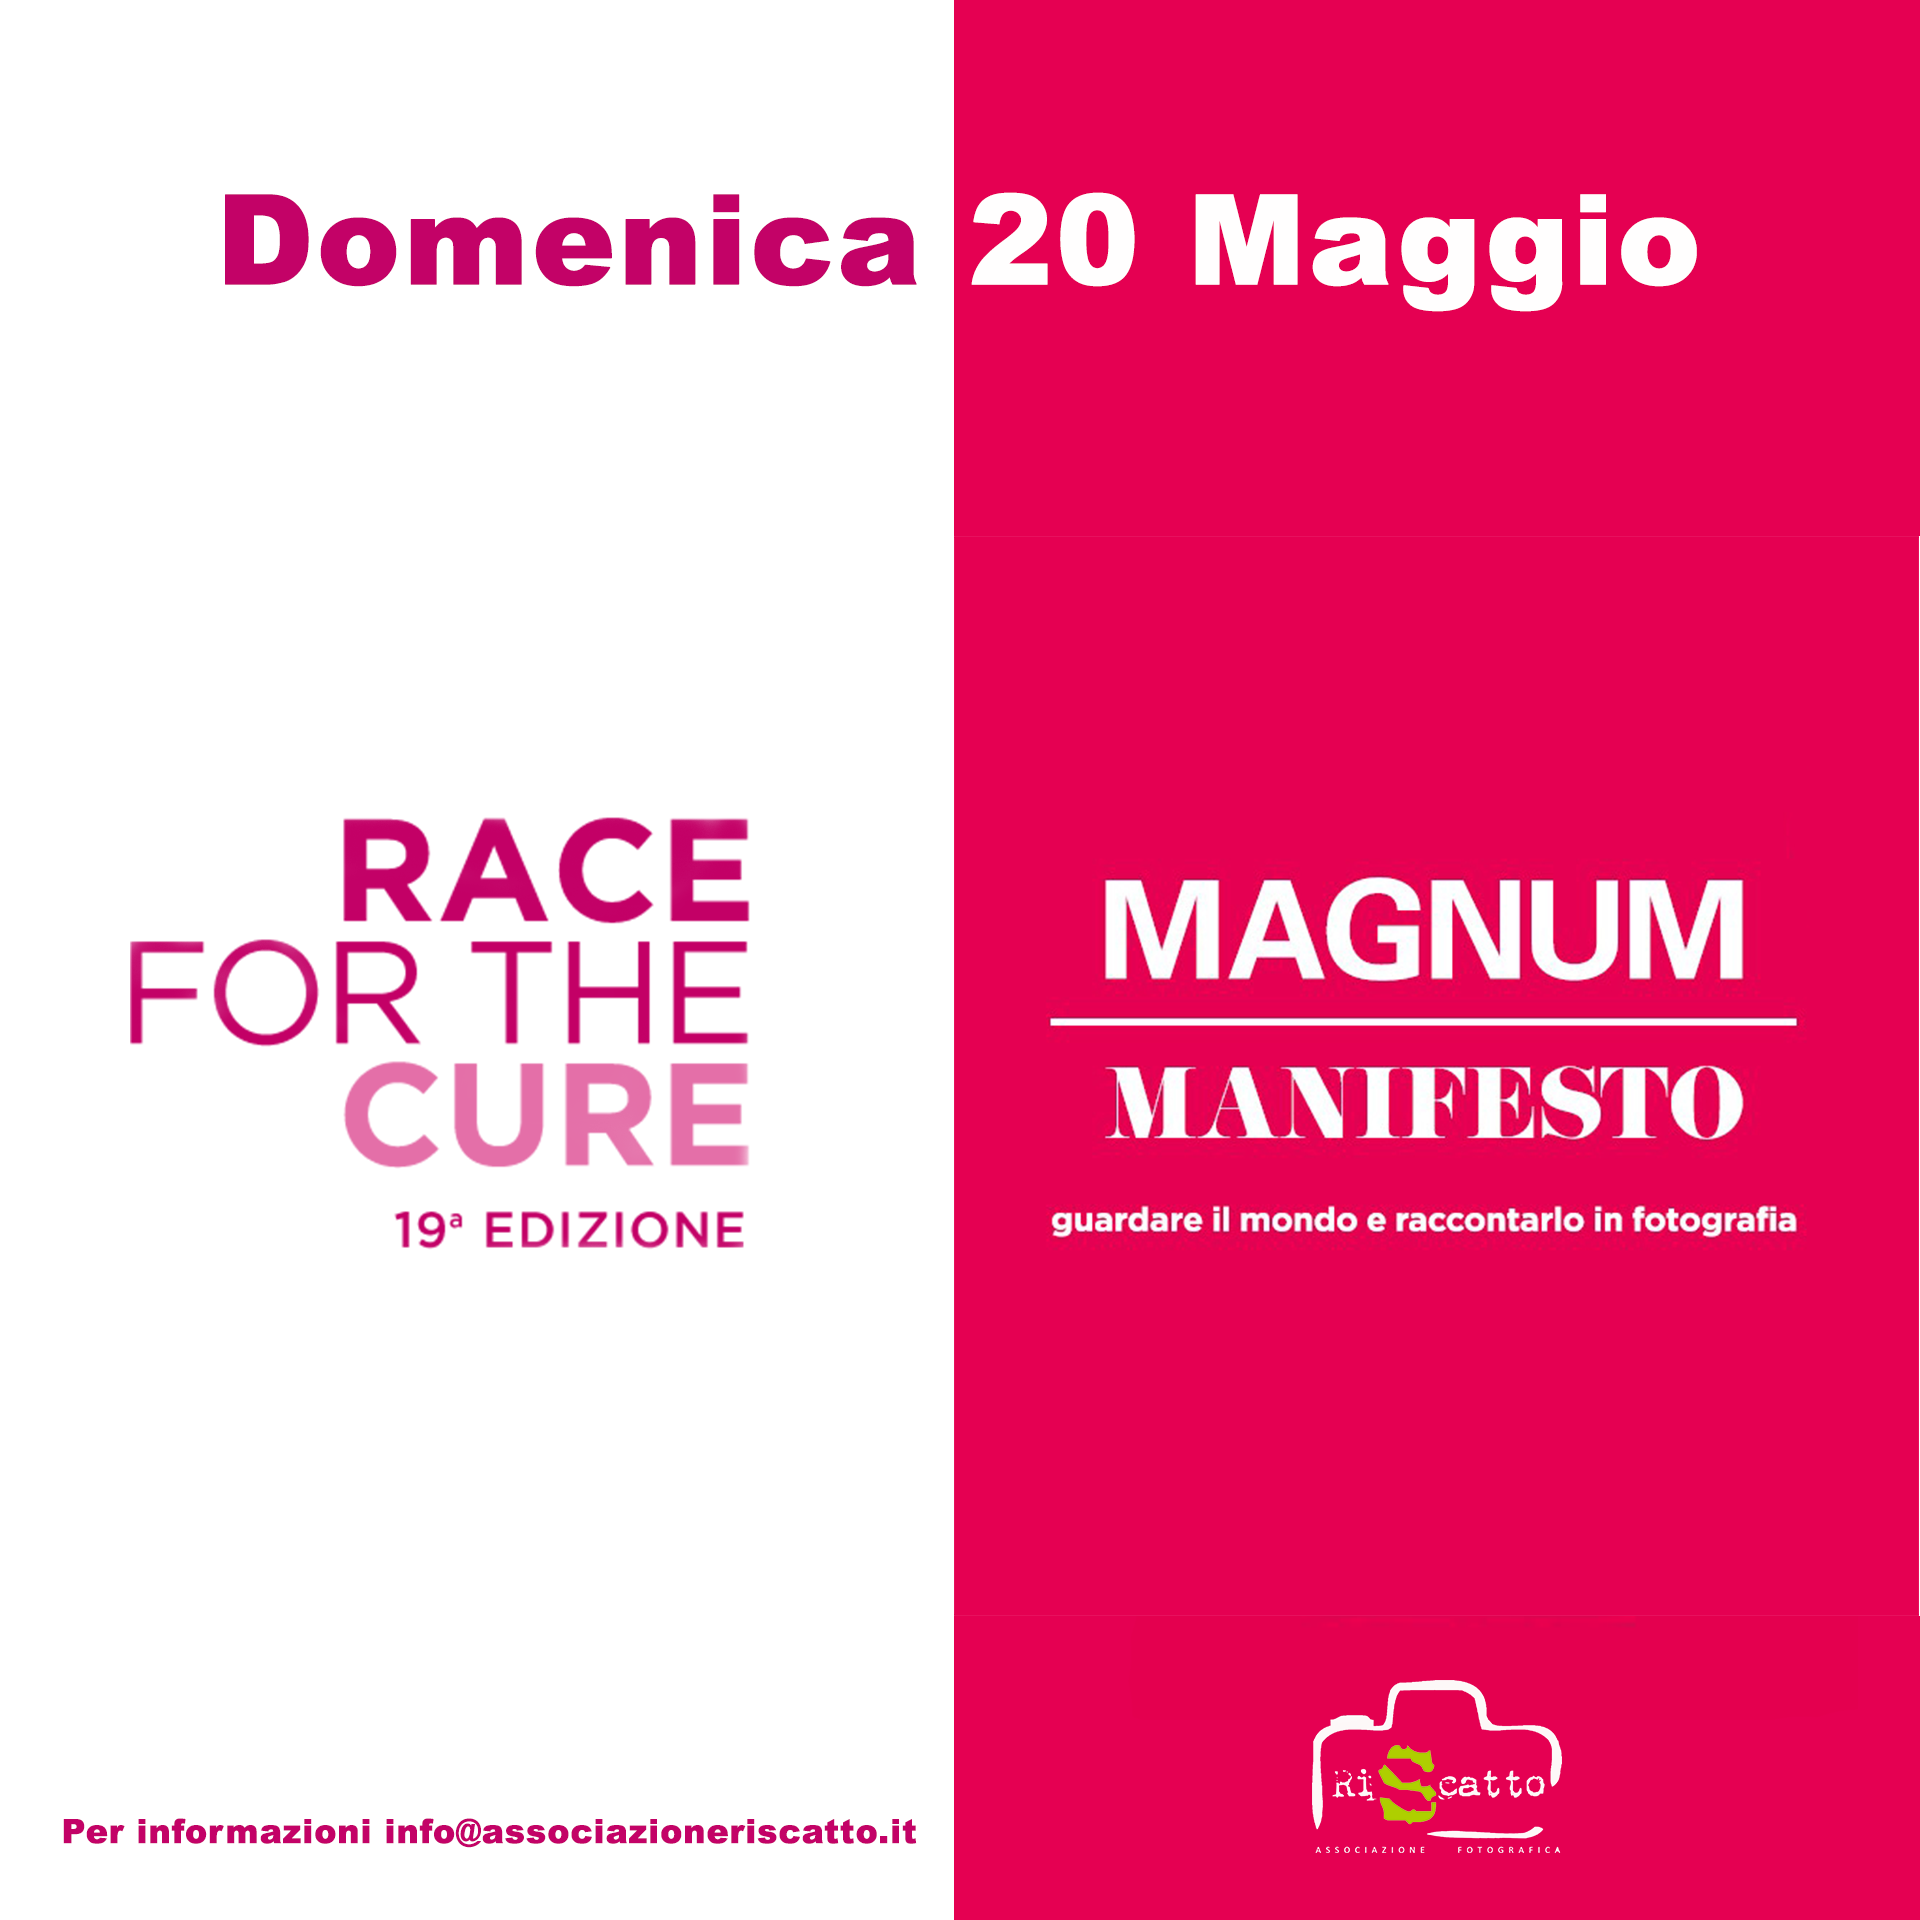 race for the cure magnum manifesto